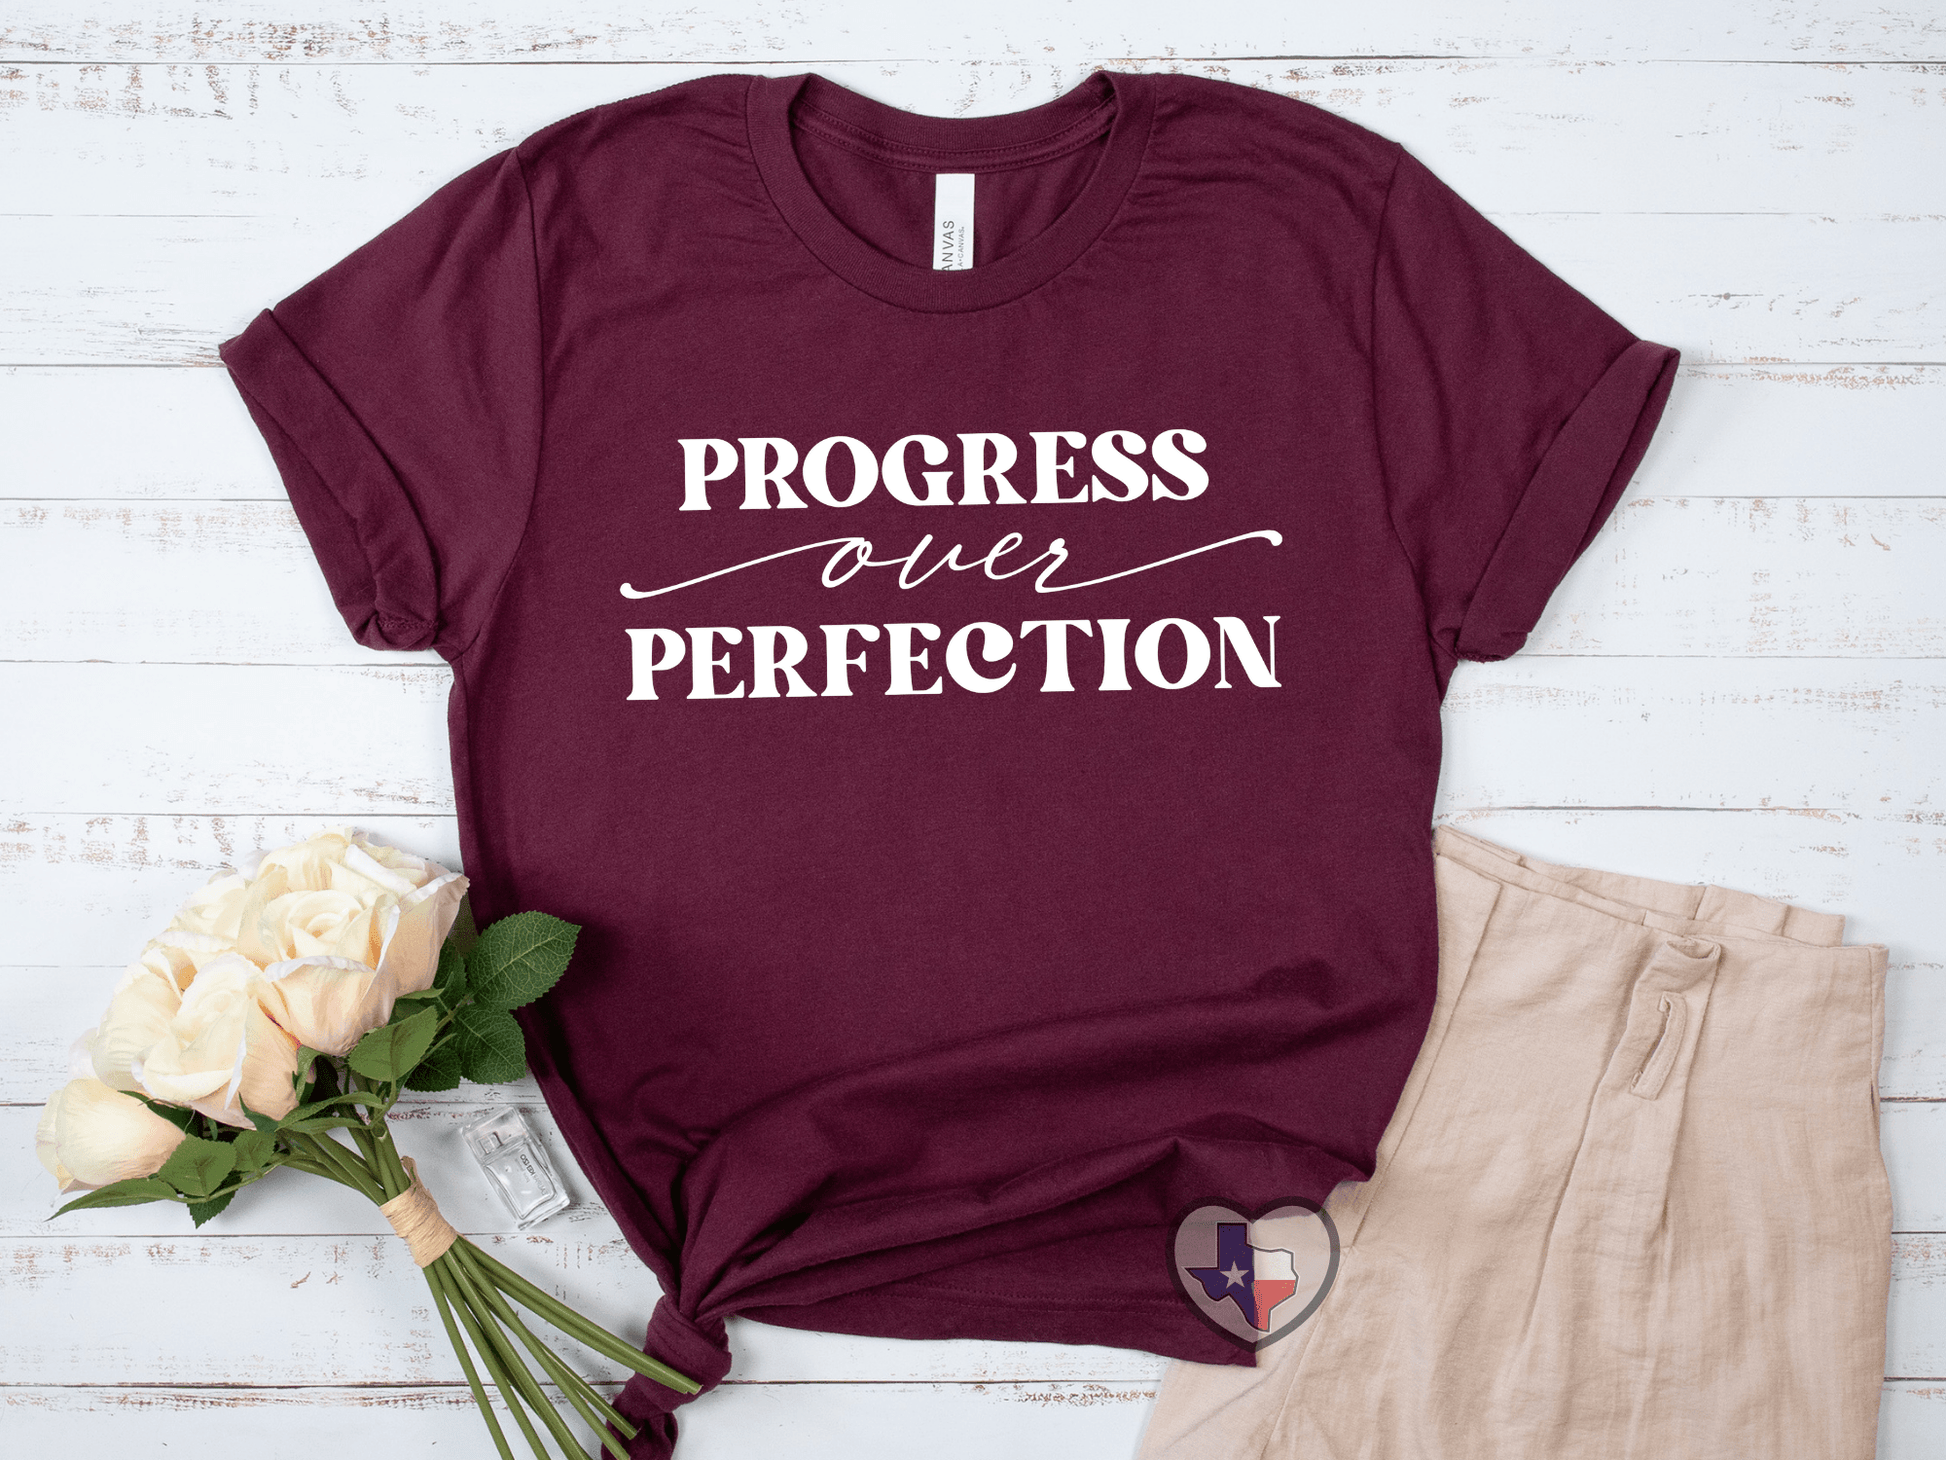 Progress Over Perfection - Texas Transfers and Designs